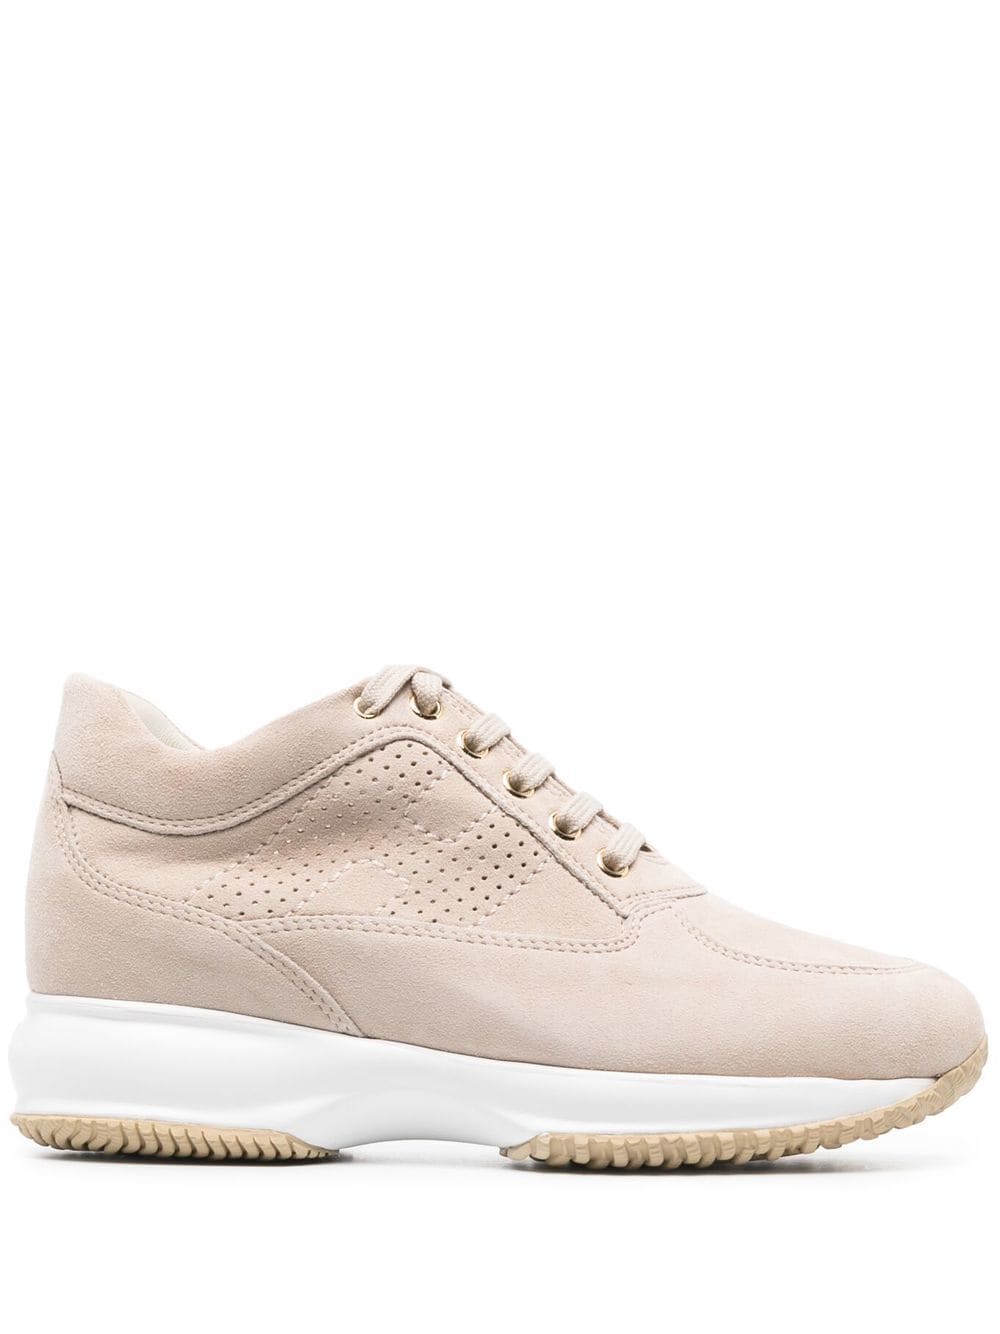 Image 1 of Hogan suede lace-up sneakers